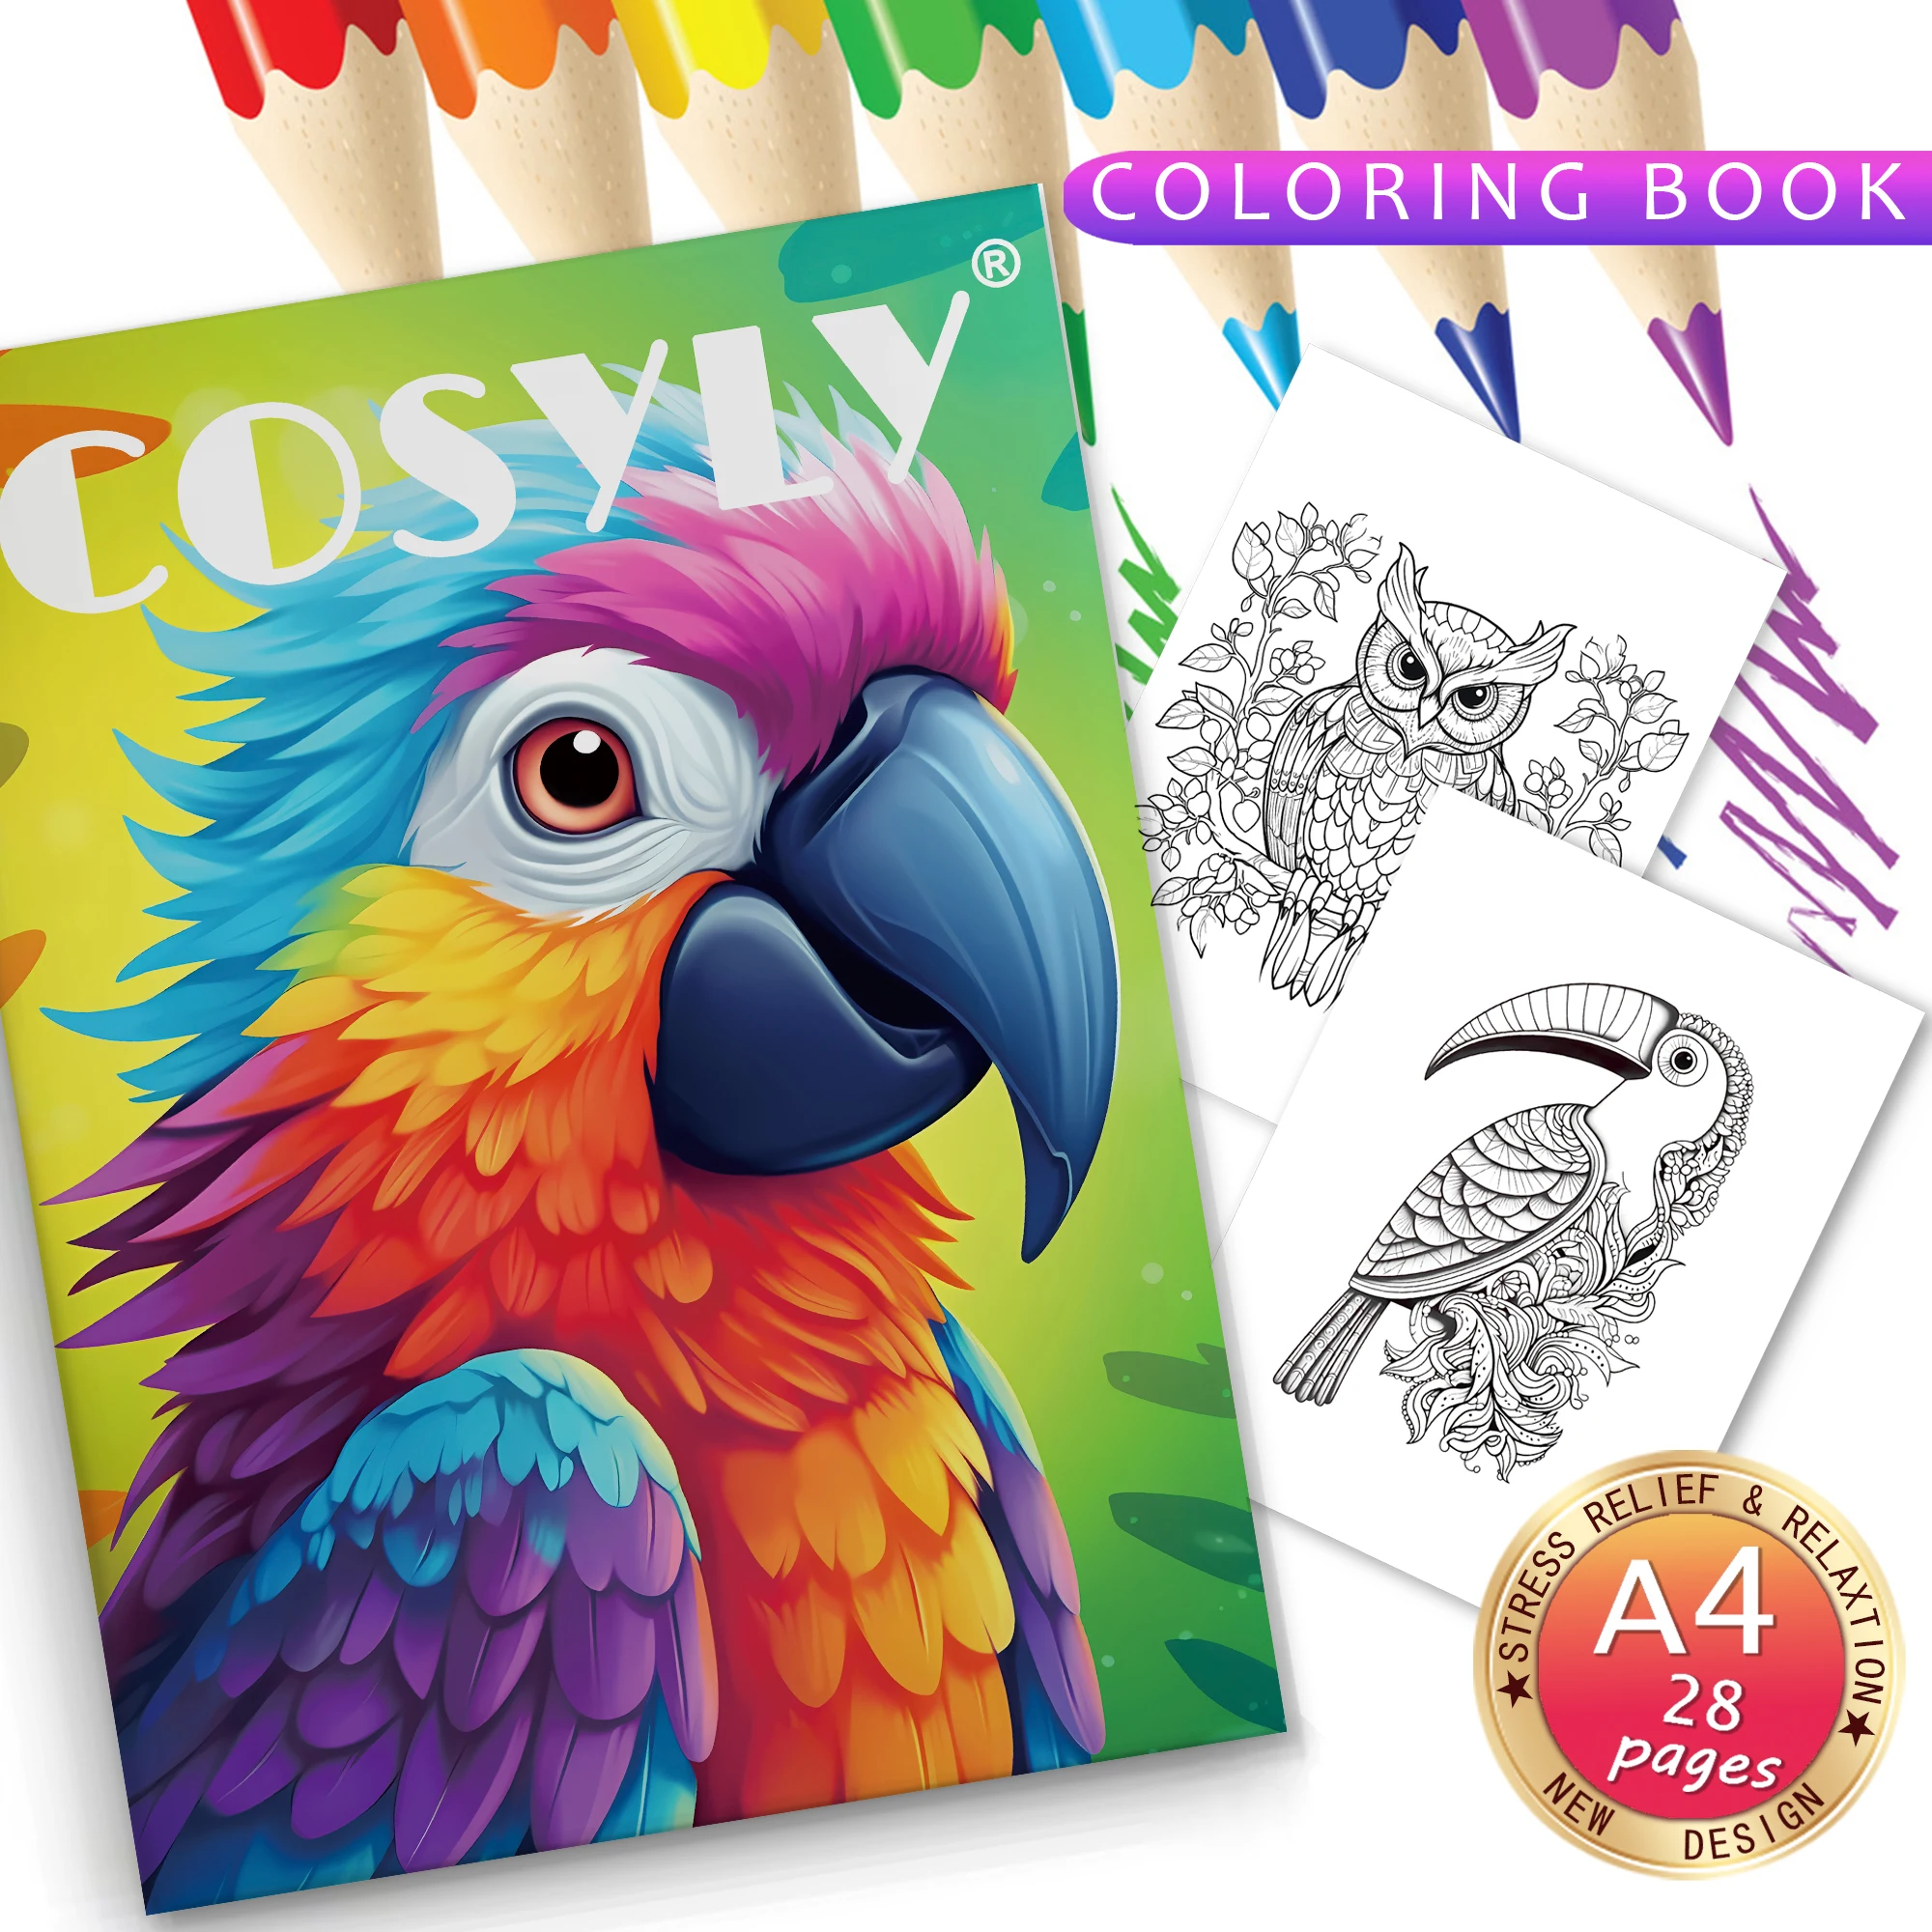 1 Pcs 12 Page 24 Figure Adult Child Graffiti Book Zen Manddlds Colouring  Book For Adult Children To Spend Time To Relieve Stress - AliExpress